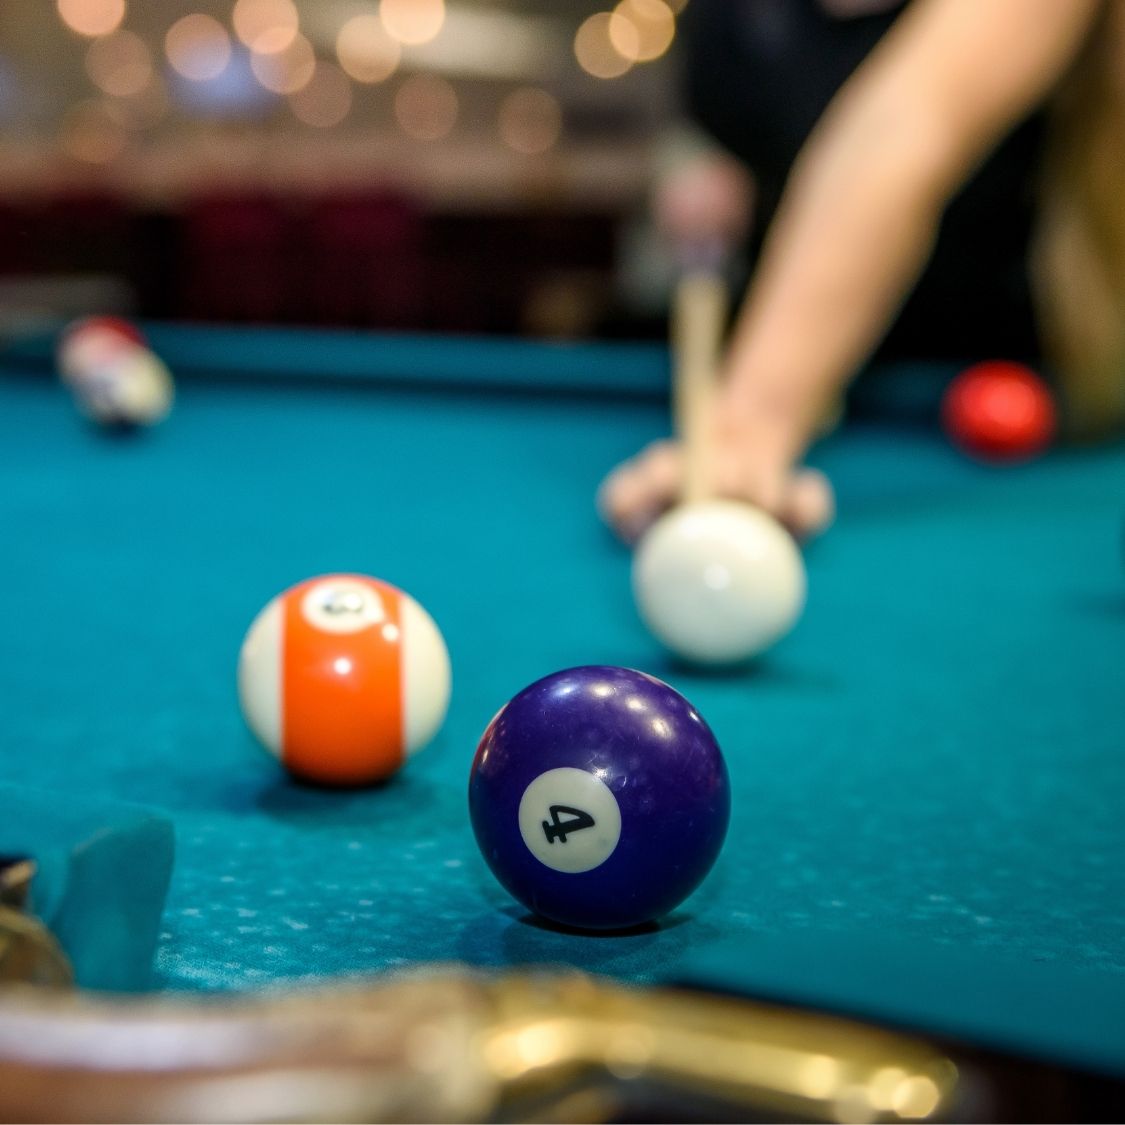 What To Know Before Purchasing a Pool Table